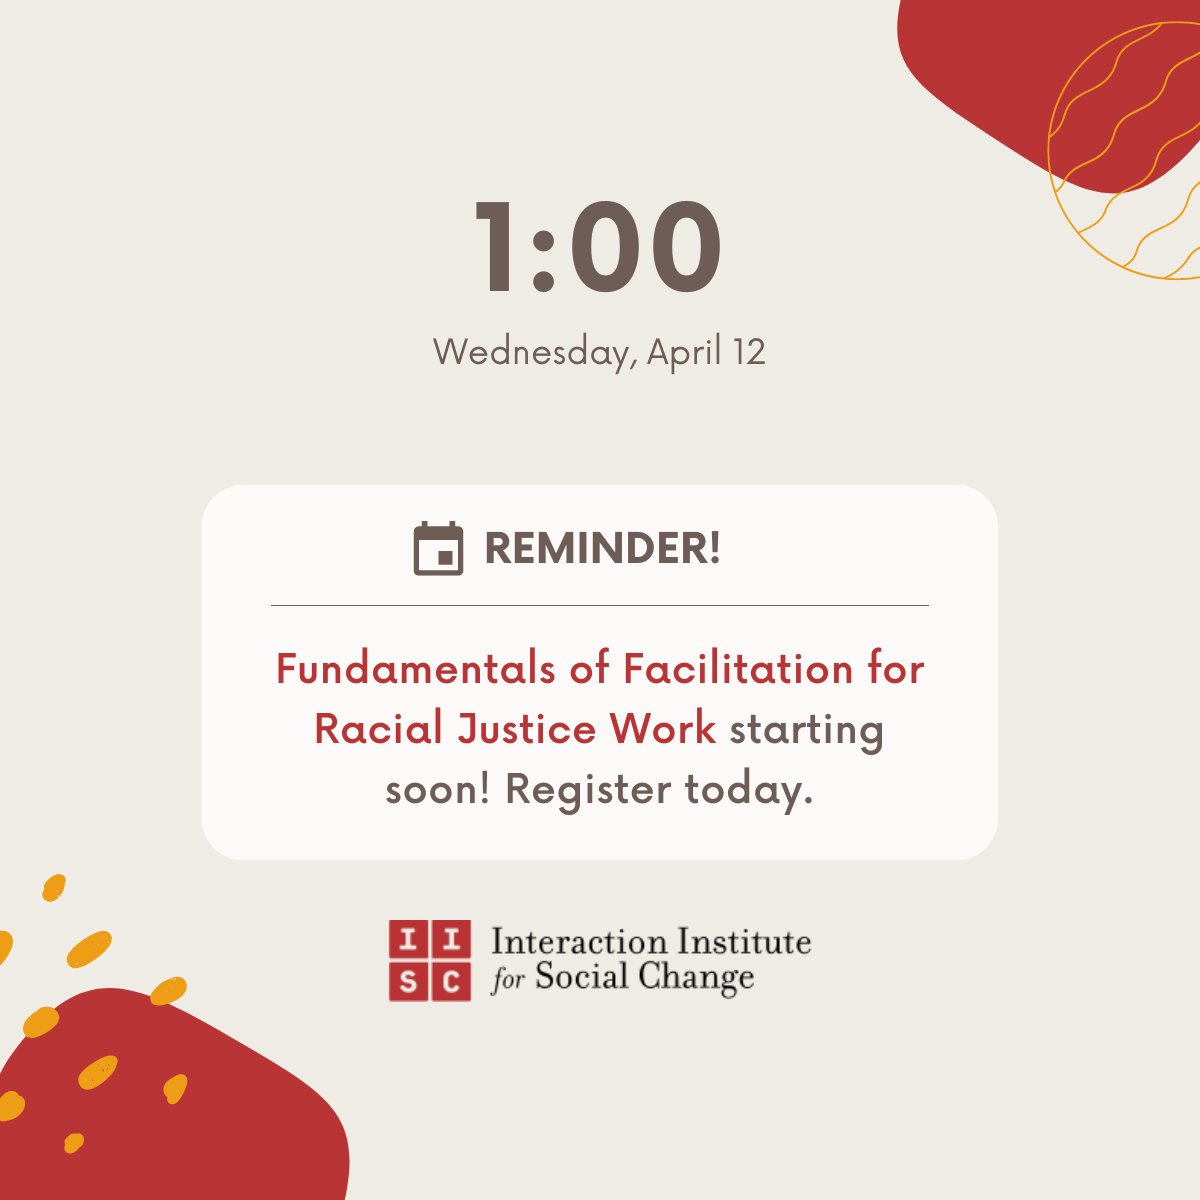 🗓️ Reminder! Only a few seats left in our upcoming workshop. If you or someone you know has been on the fence about registering, now's the time to commit! Learn more and register today on our website interactioninstitute.org/trainings/